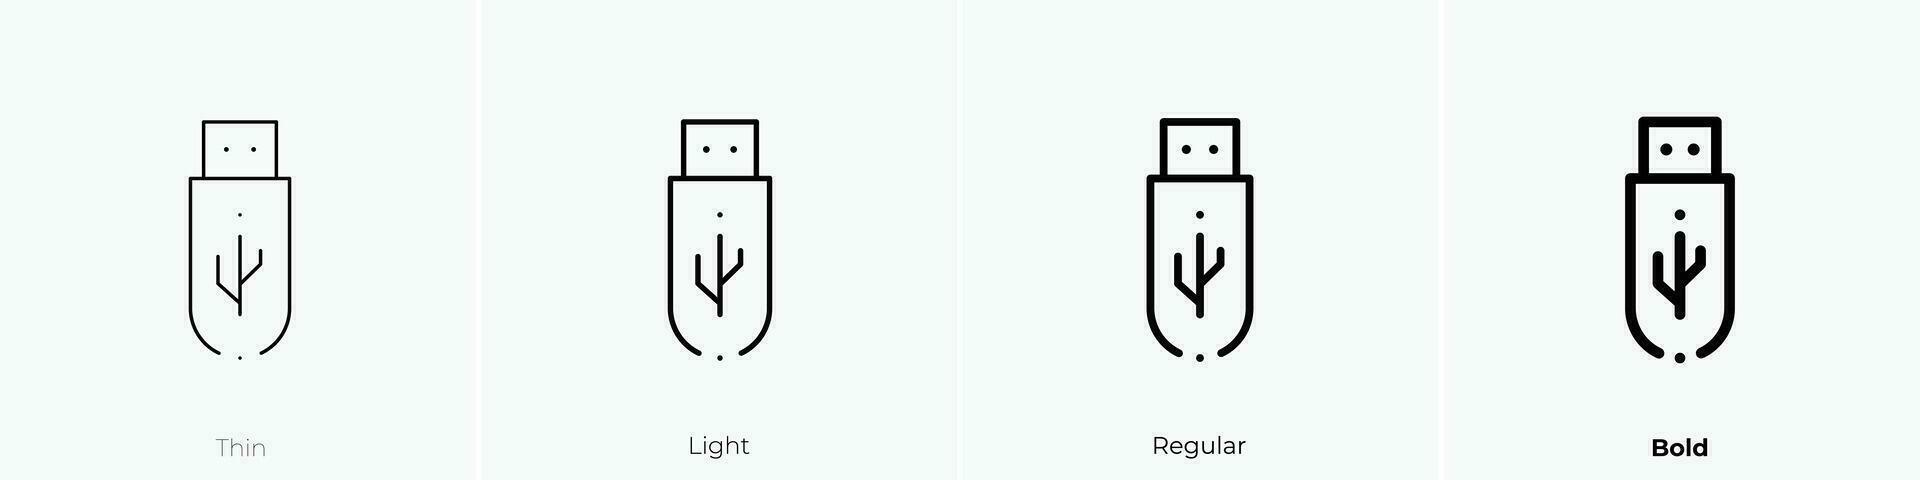 usb drive icon. Thin, Light, Regular And Bold style design isolated on white background vector